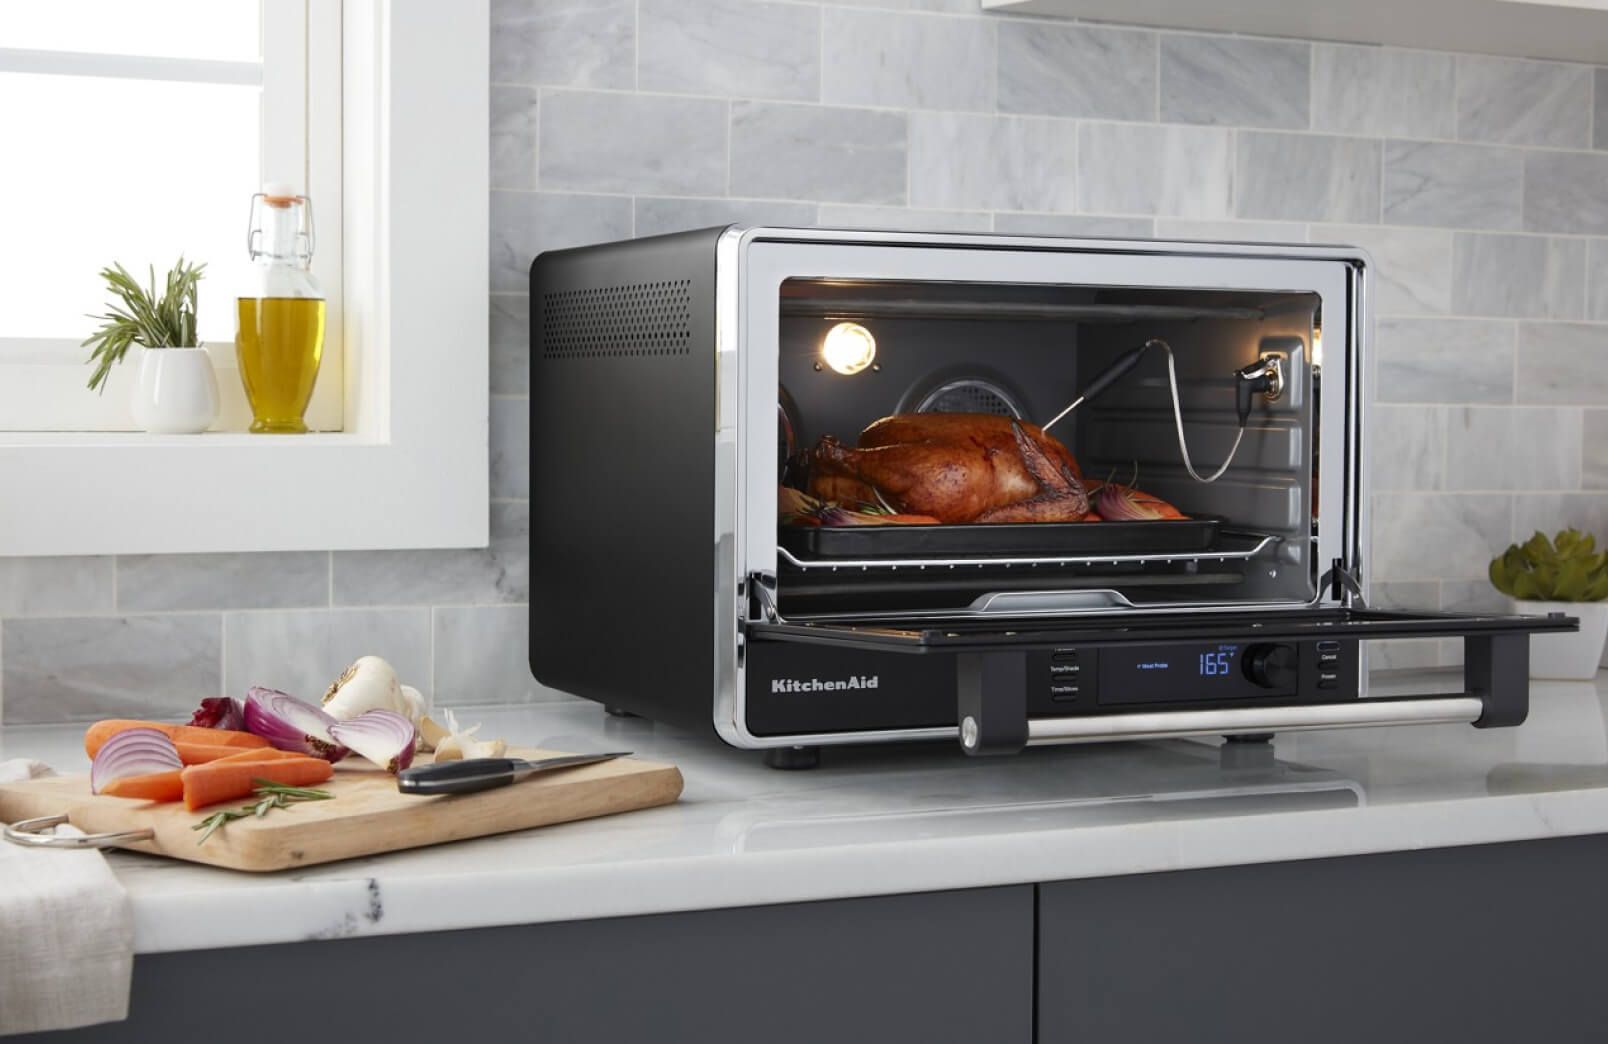 A KitchenAid® Dual Convection Countertop Oven roasting a whole chicken.